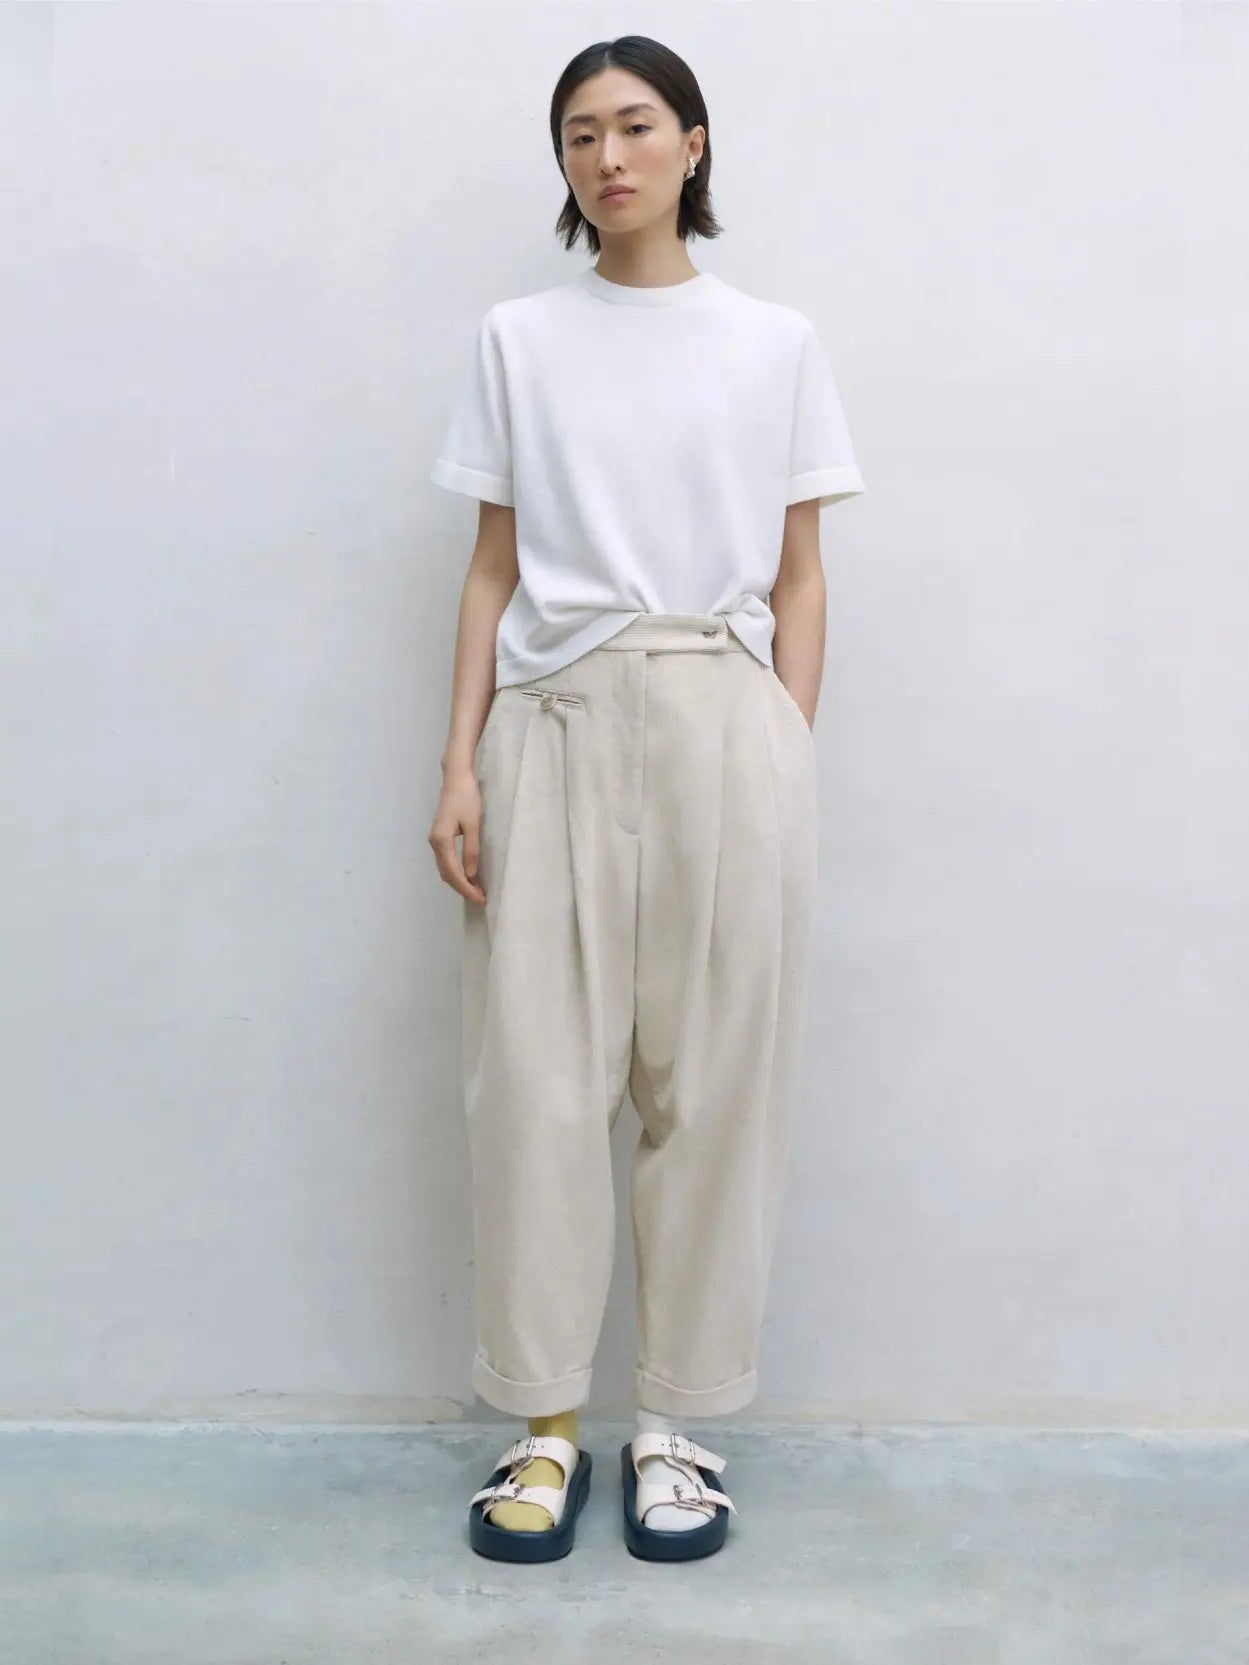 A pair of beige, high-waisted Corduroy Carrot Pants by Cordera with a pleated front and a relaxed, tapered fit. The pants feature a waistband with belt loops and a double-button closure. The legs end in simple cuffs, giving them a polished yet comfortable look, available now at Bassal Store in Barcelona.